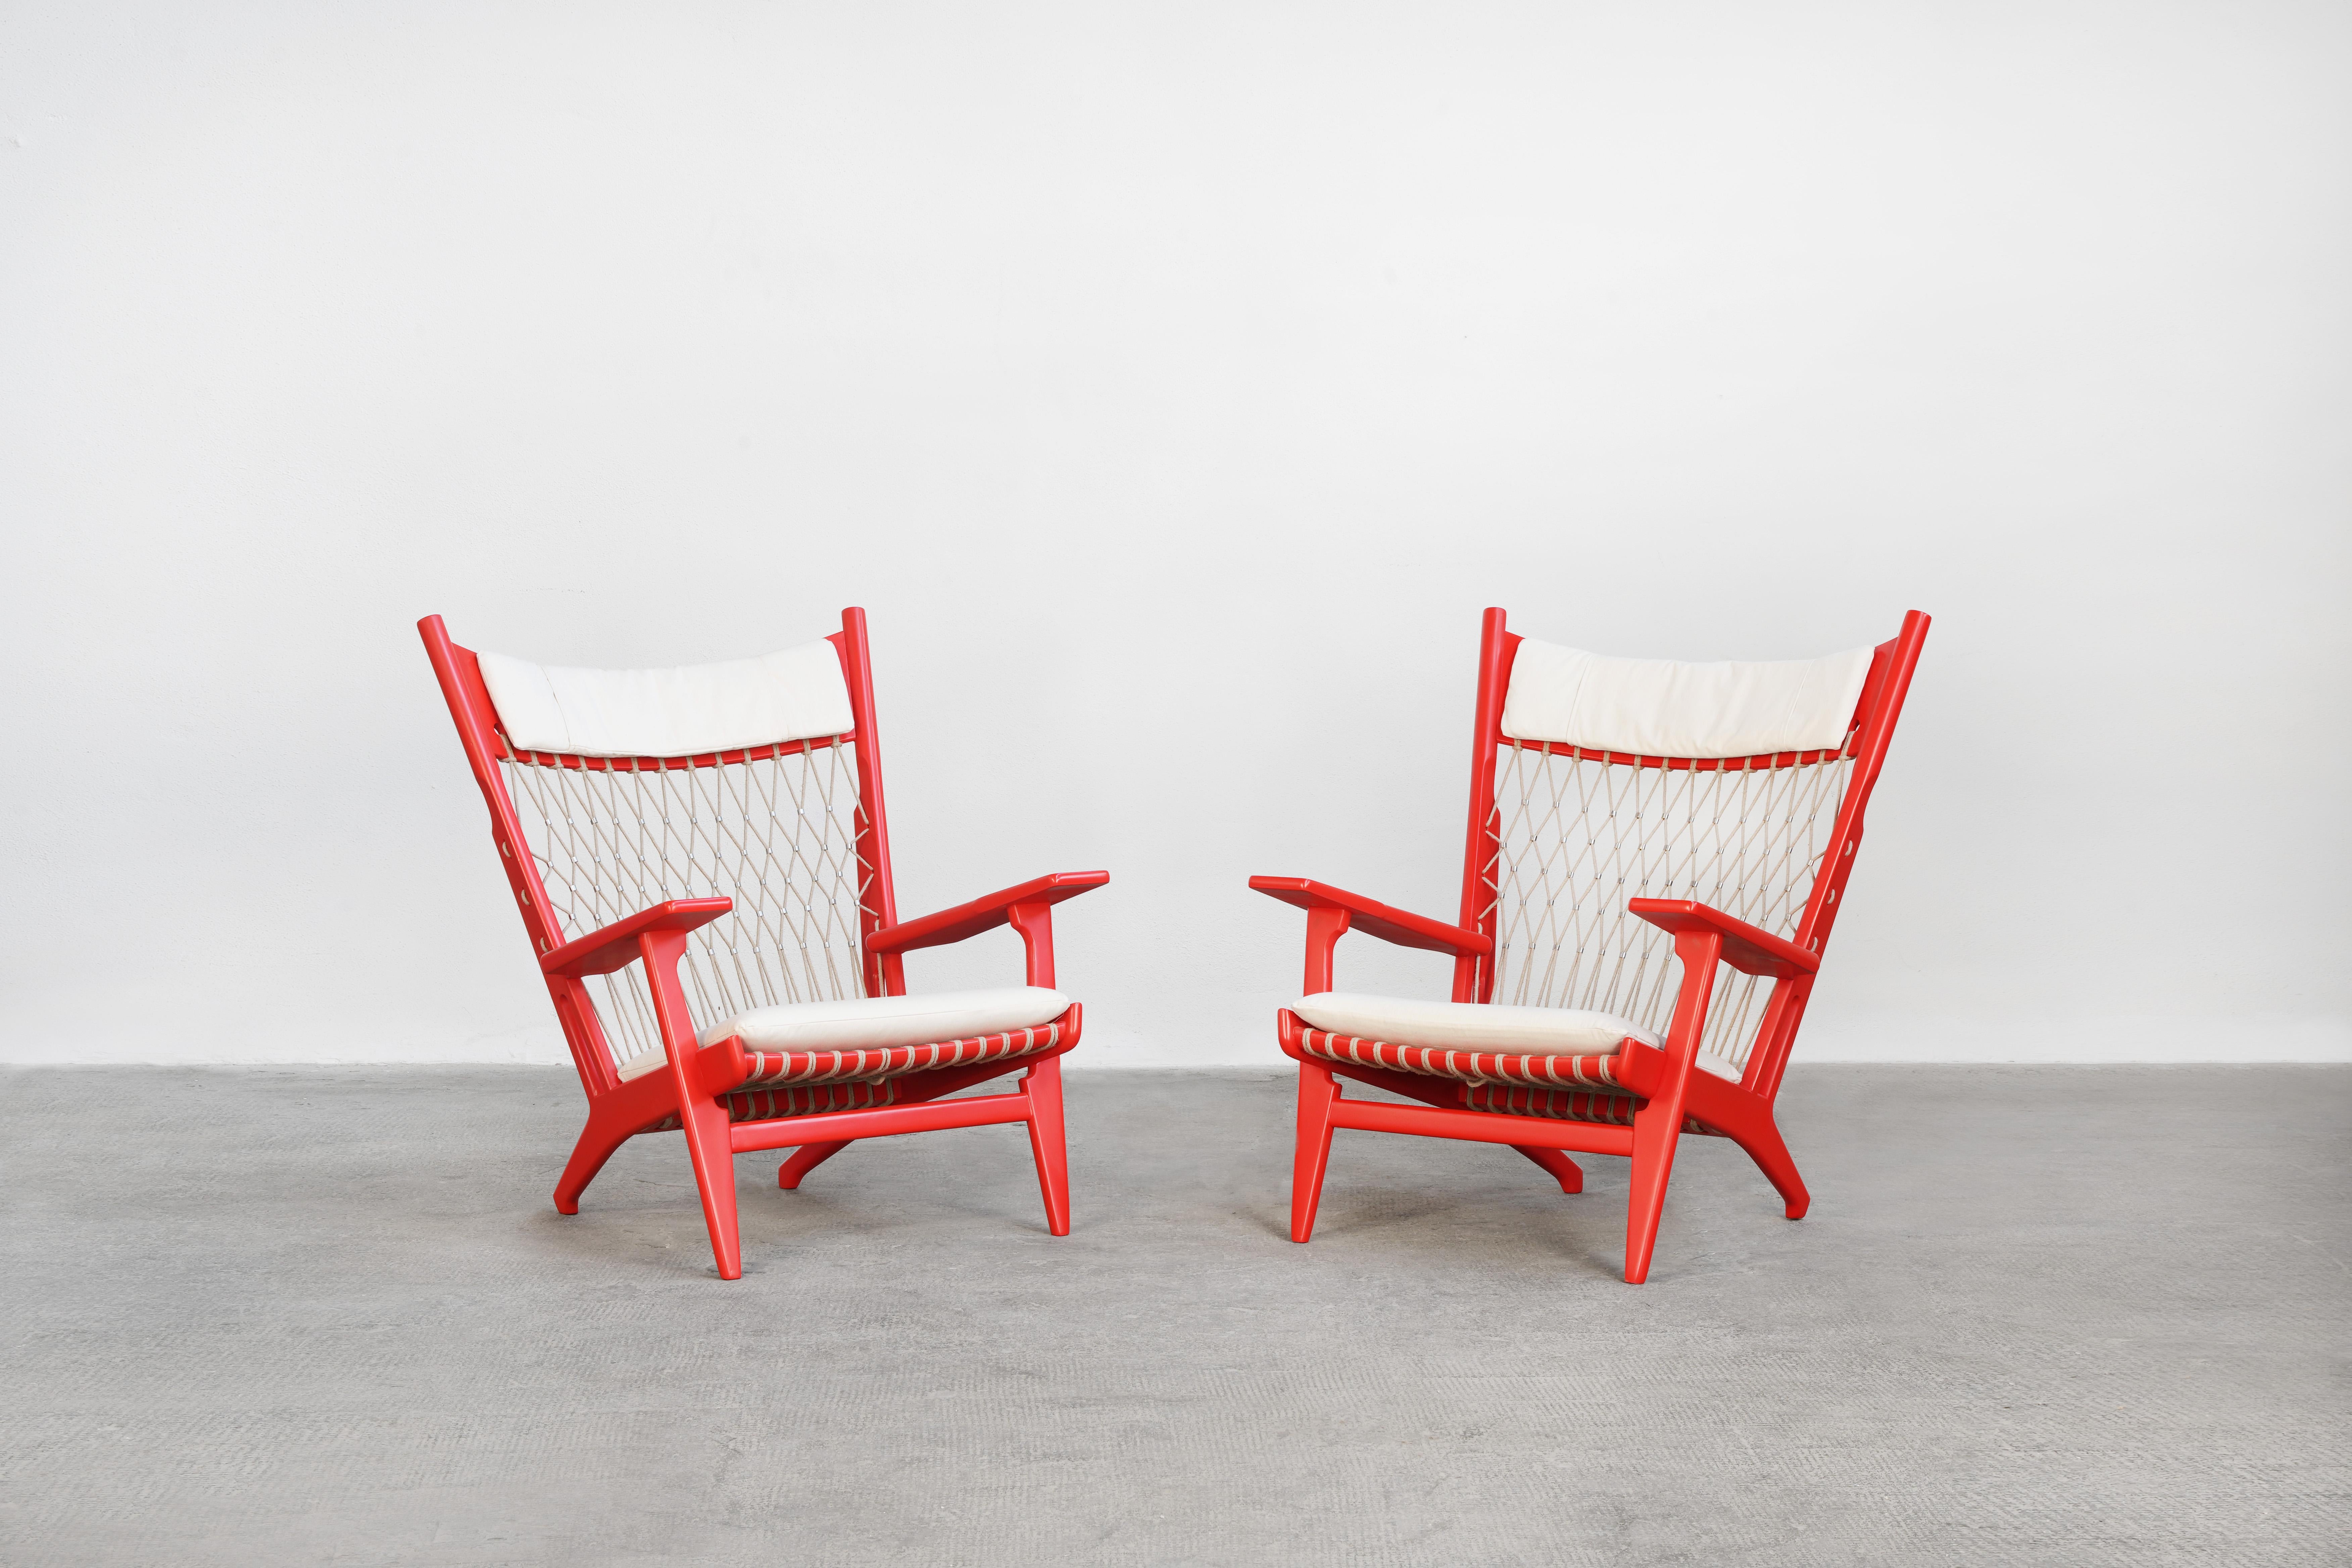 Beautiful pair of Danish easy chairs designed by Hans J. Wegner and manufactured by Johannes Hansen. 
These rare lounge chairs come in excellent restored condition with loose seat and neck cushions upholstered with high-quality fabric in cotton.